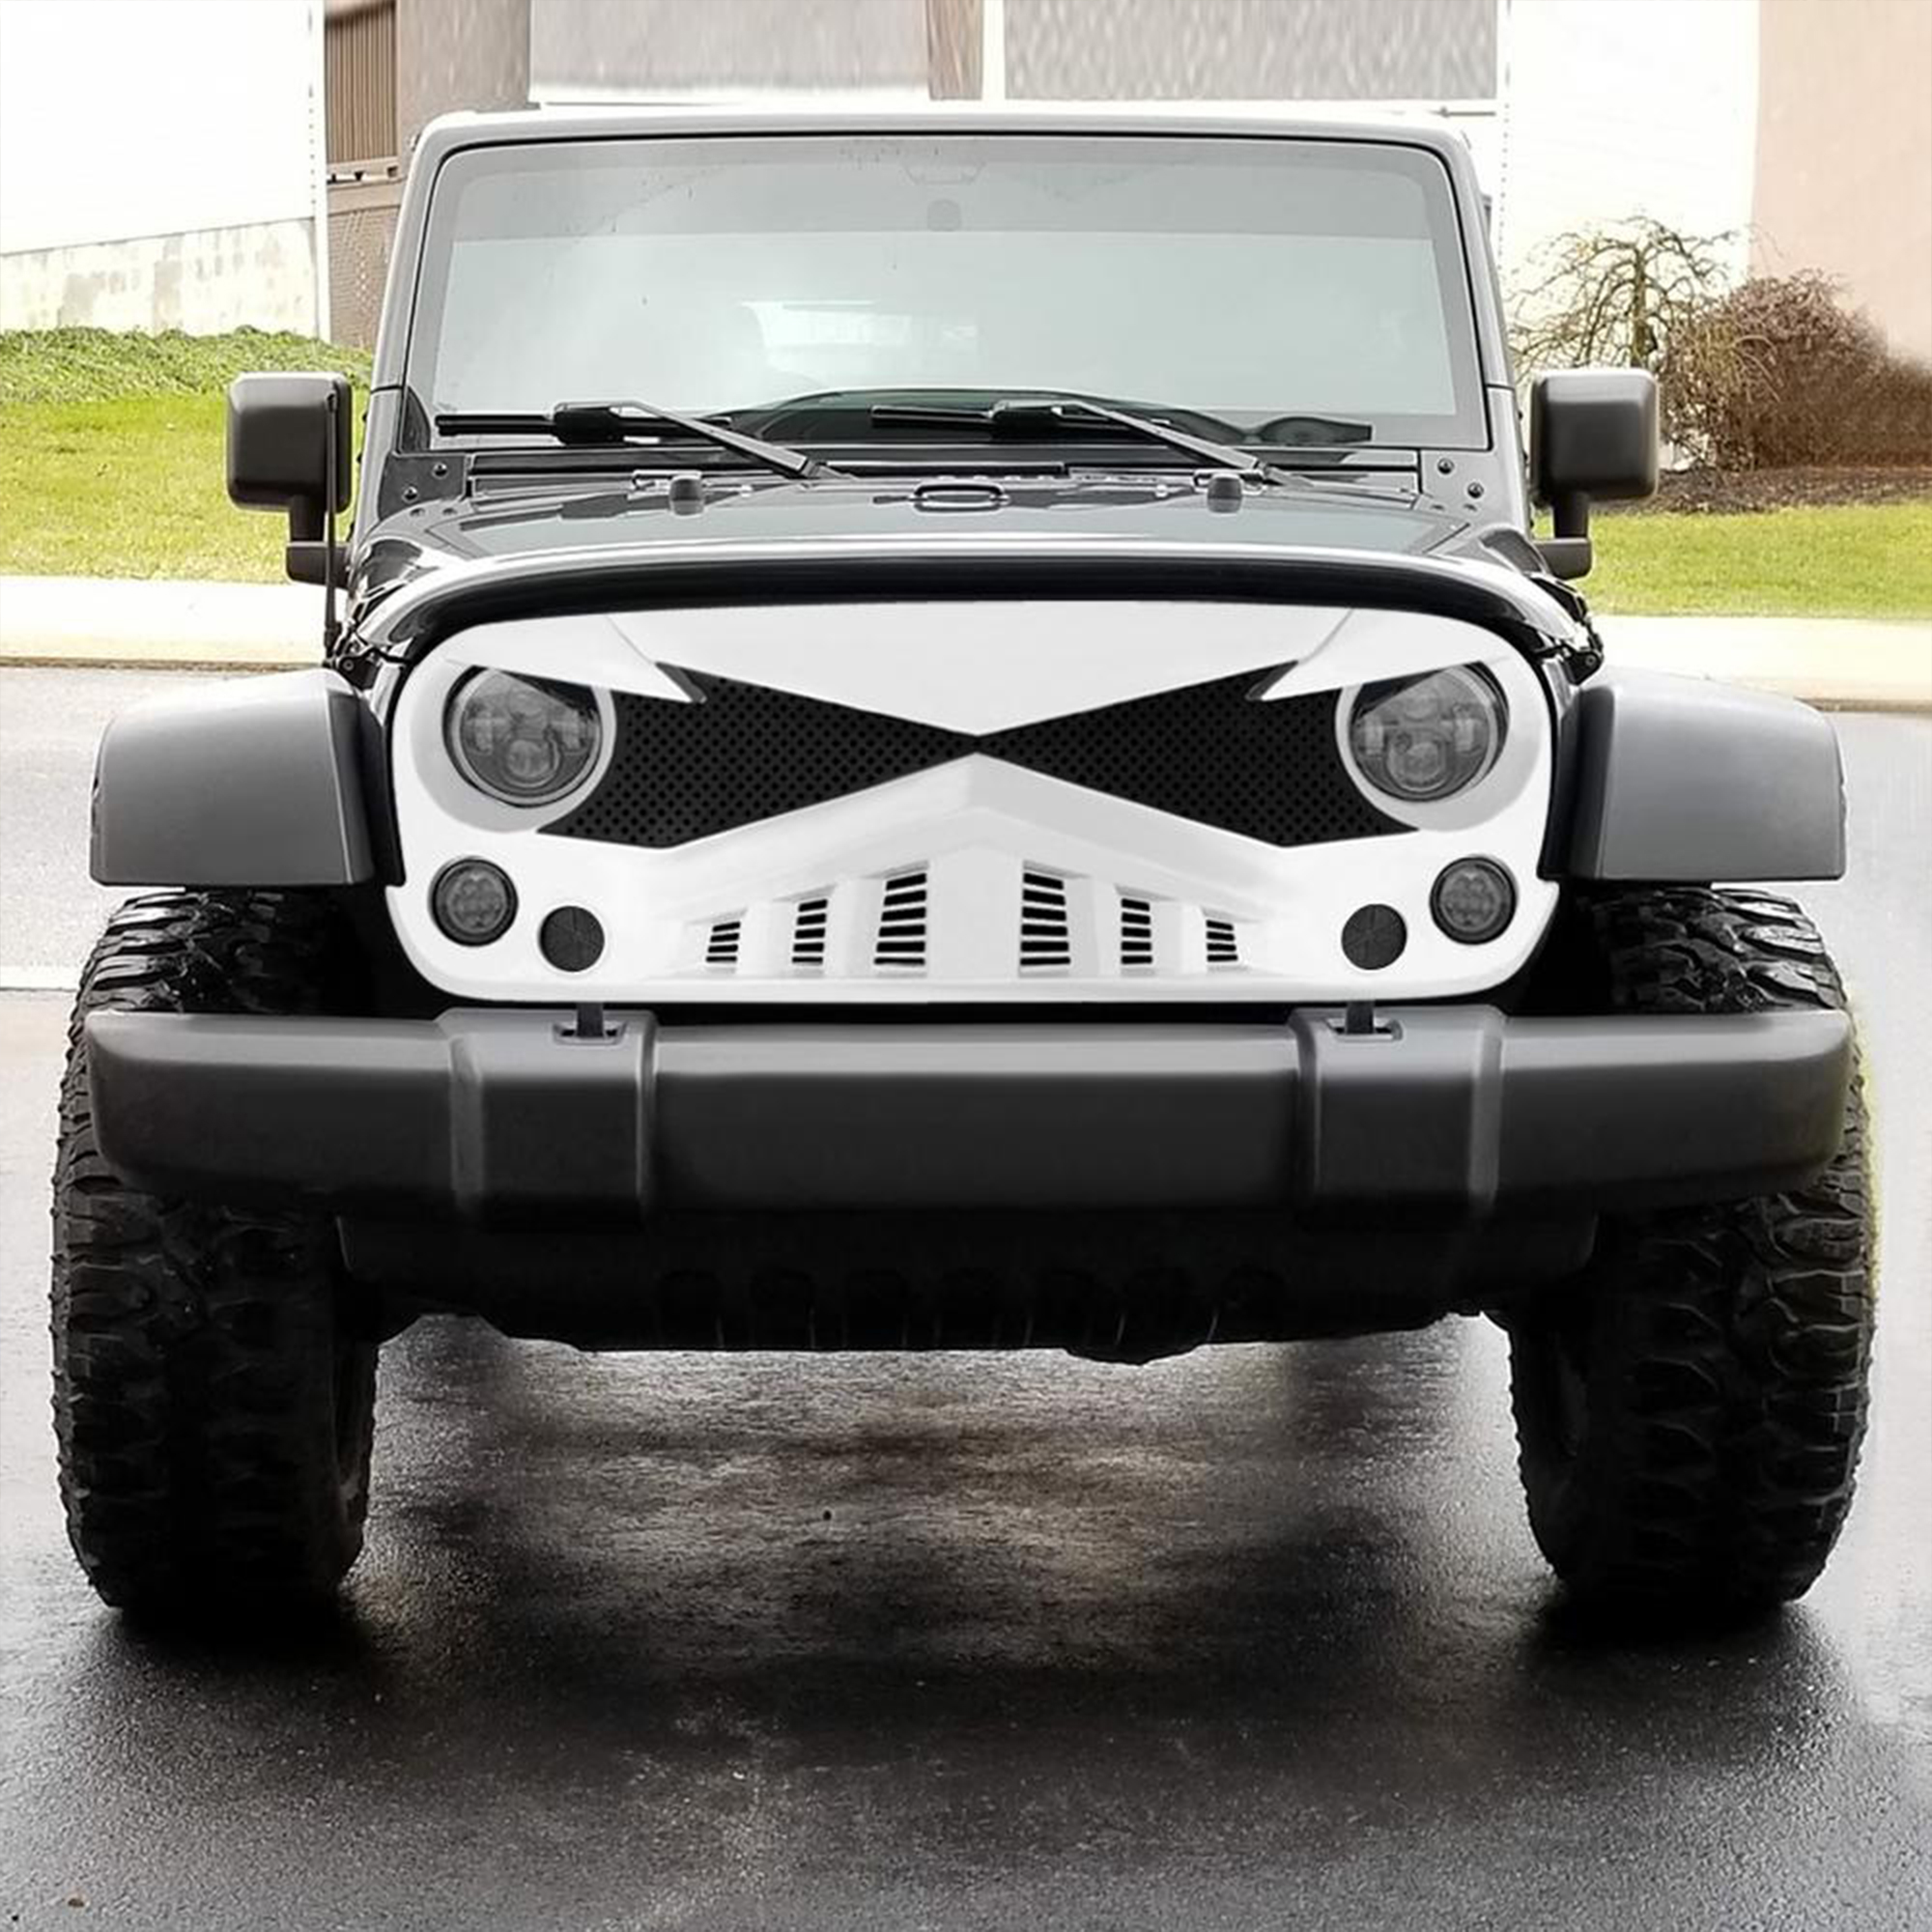 AMERICAN MODIFIED Hawke Grille for 07-18 Jeep Wrangler JK Models, White 